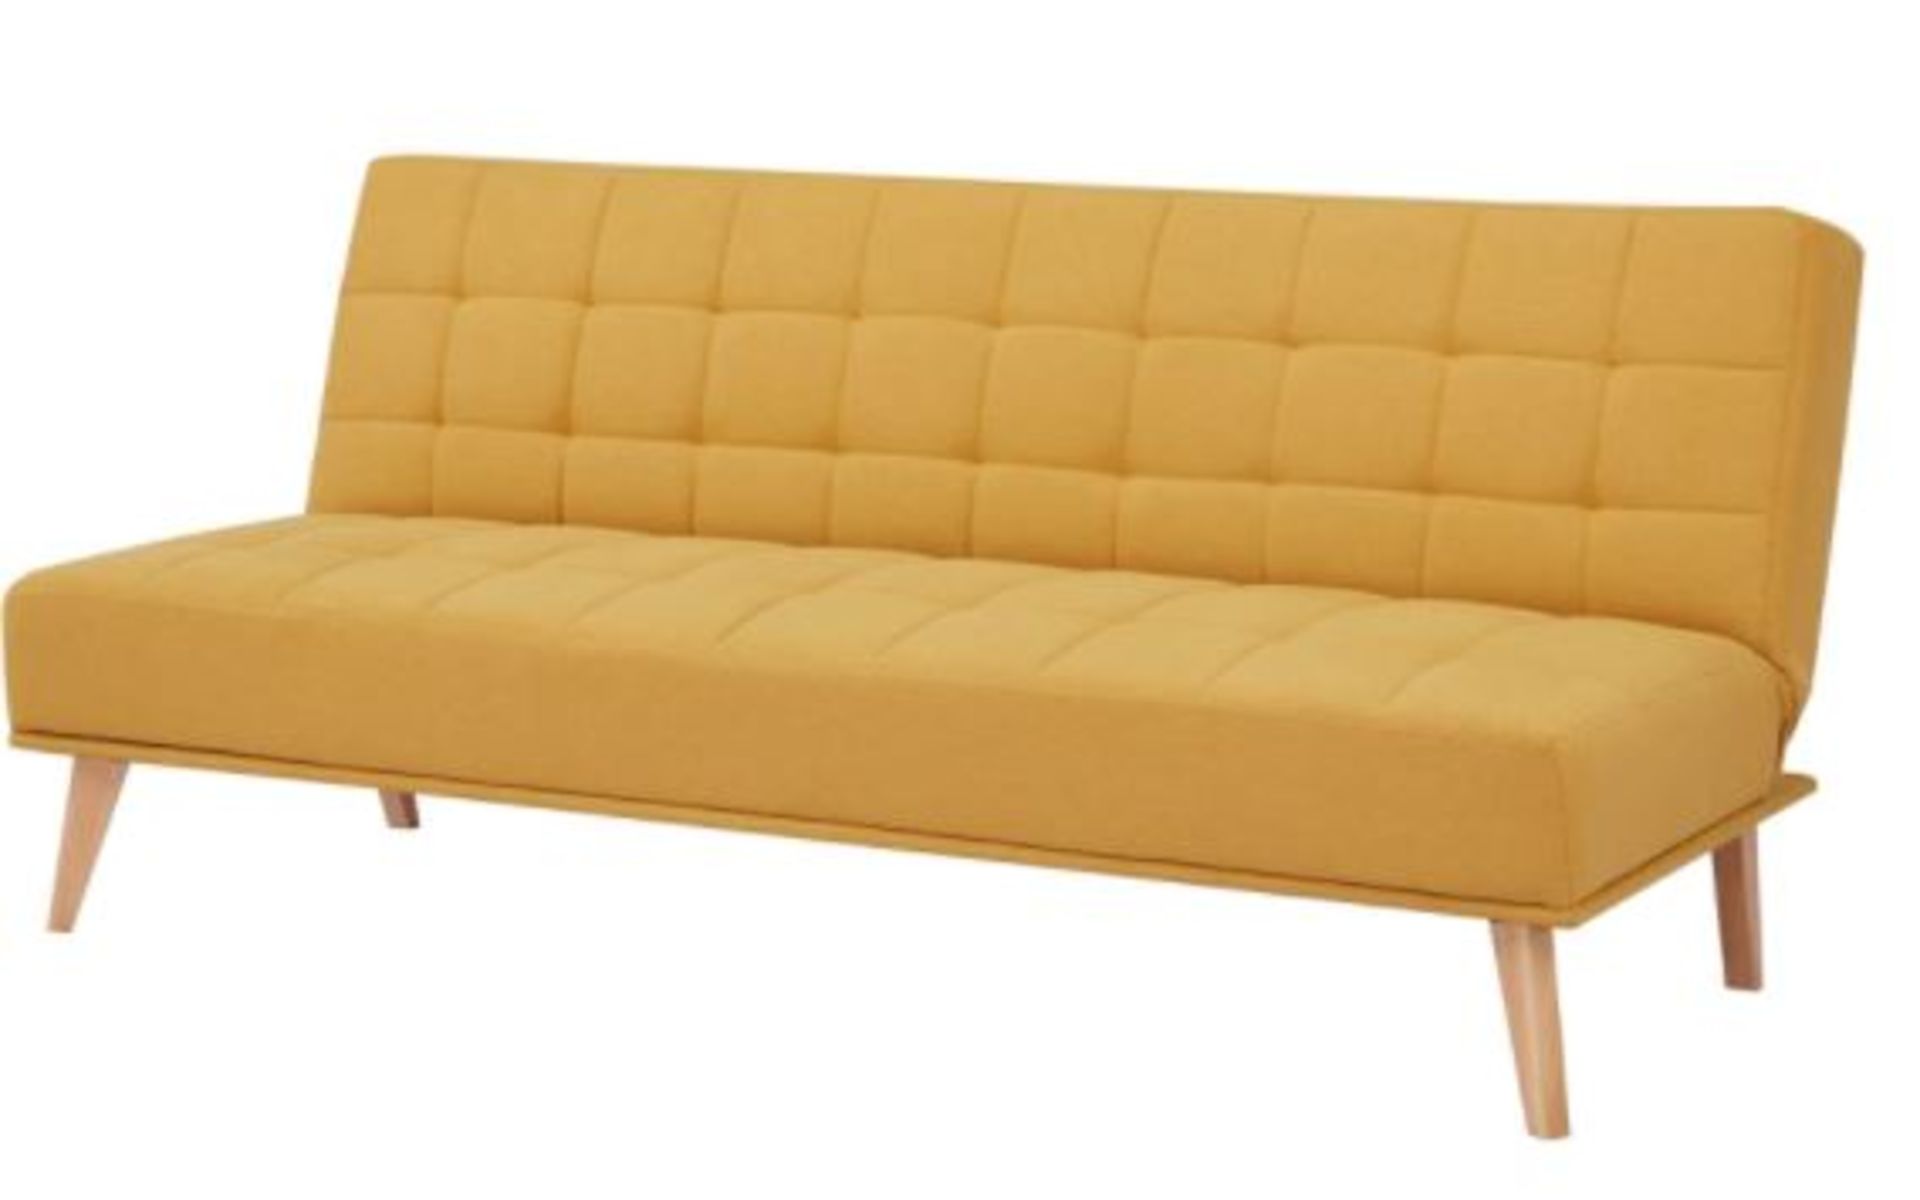 1 X Click Clack Kelly Sofa Bed Ochre. Wooden Frame With Solid Birchwood Legs. 100% Polyester Fabric - Image 2 of 9